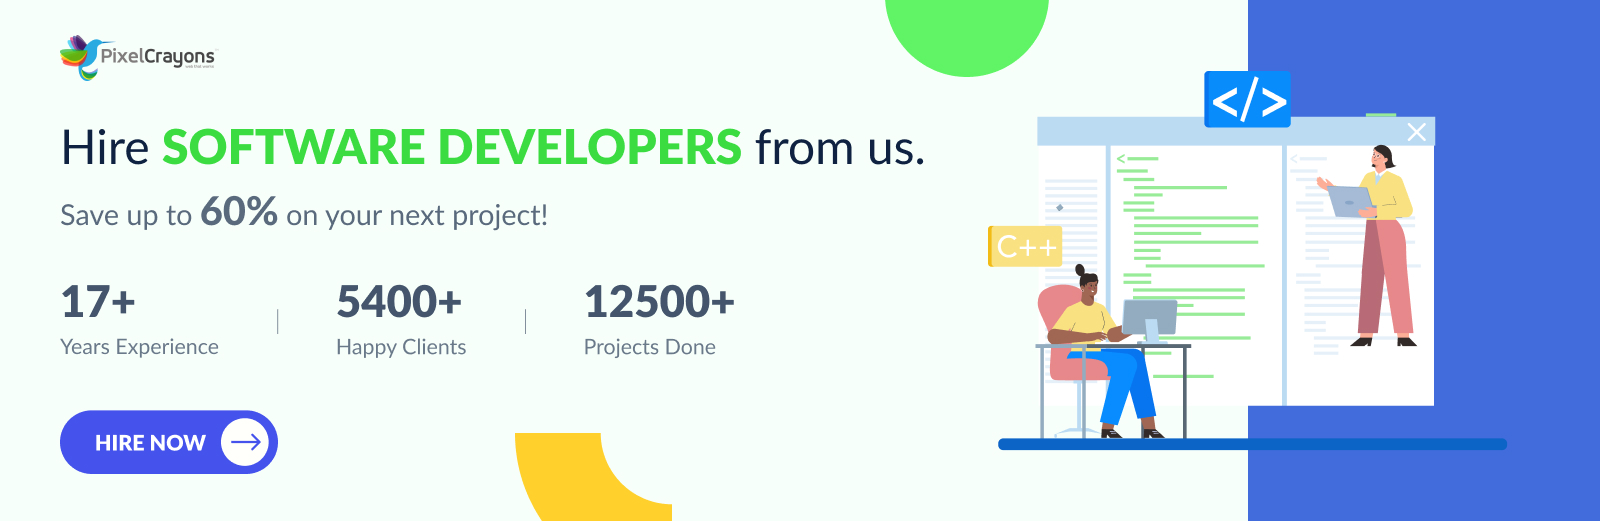 Hire Software developers 2